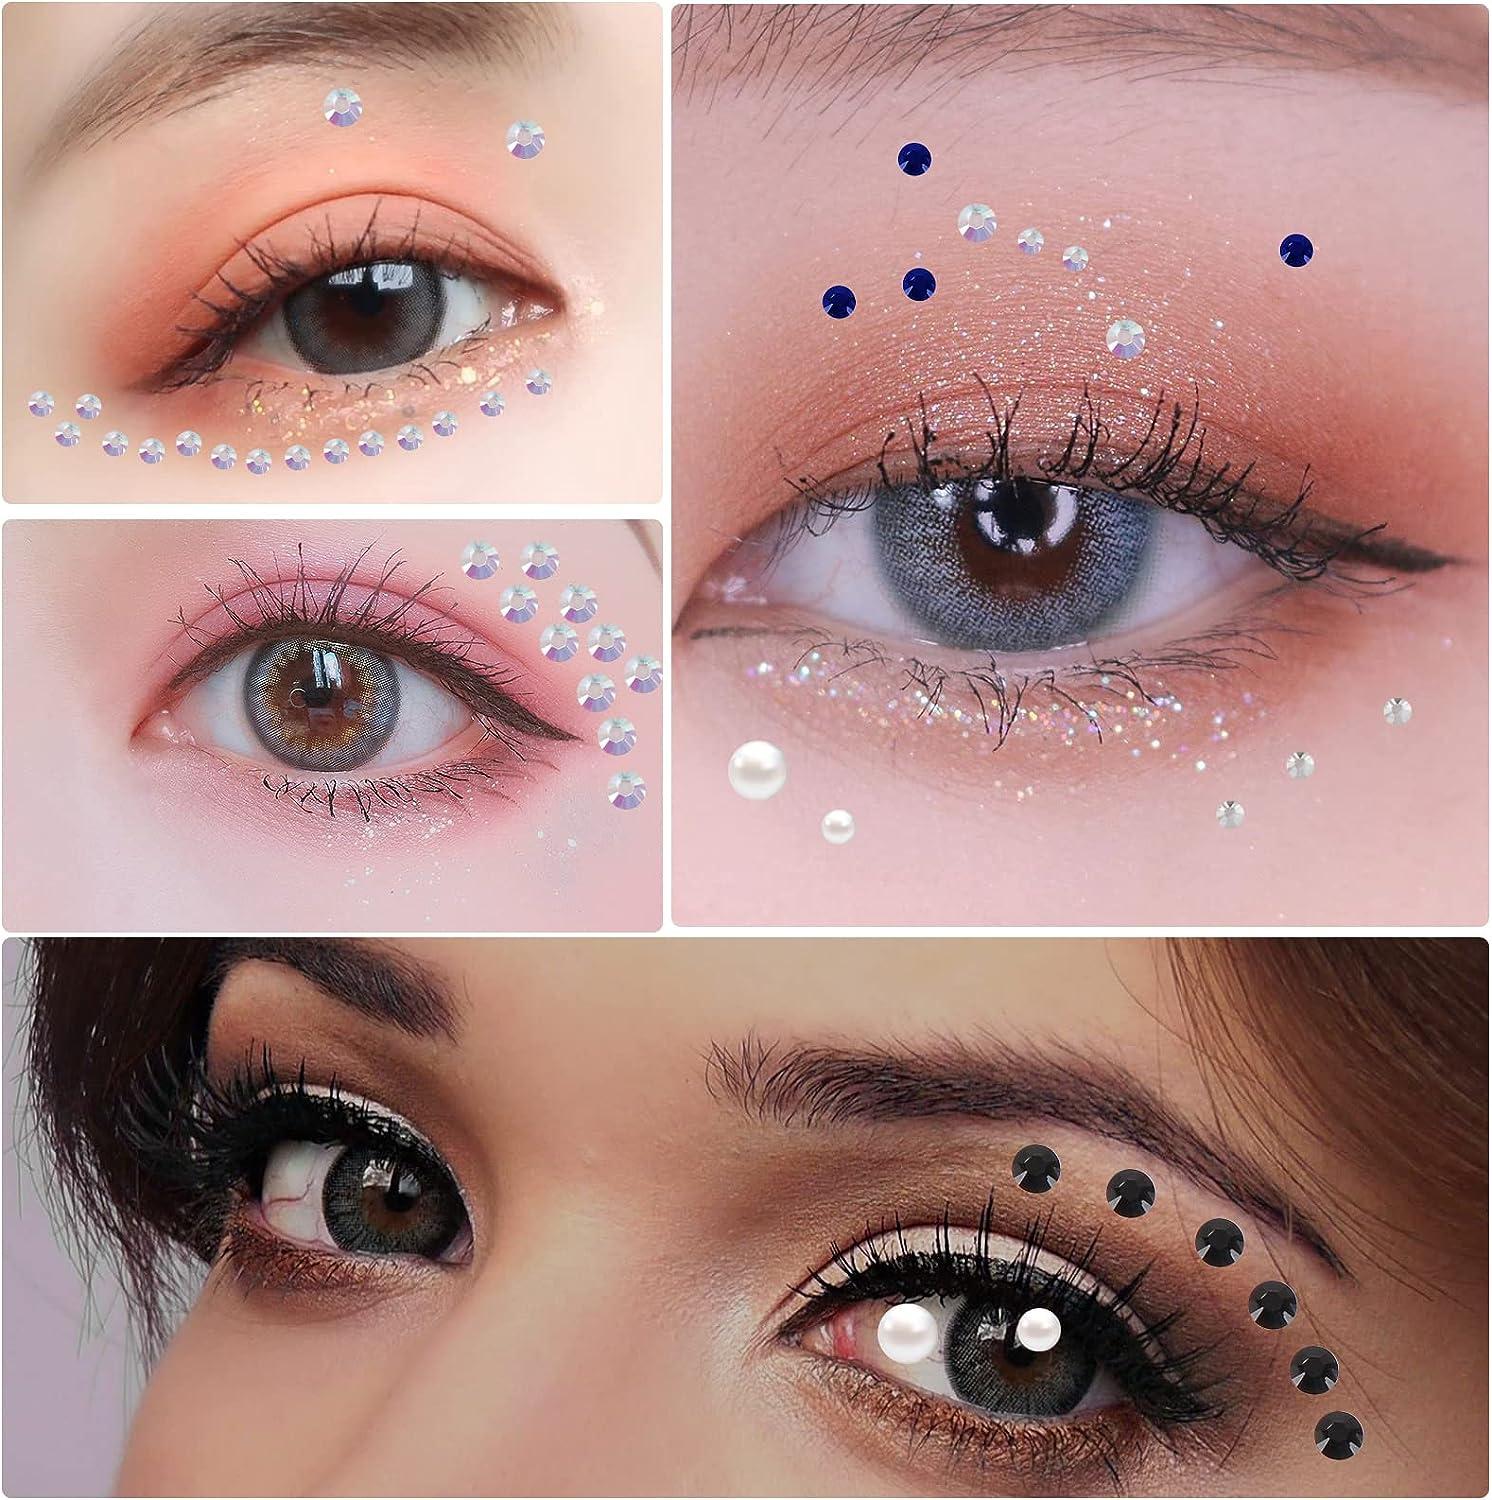 6 Sheets(100Pcs /Sheet) Face Jewels Face Gems Stick on Face Body and Nails  4 Different Sizes - 3.4.5.6 mm Creative Colors & Shapes. Face Rhinestones  Makeup Gems Body Jewelry